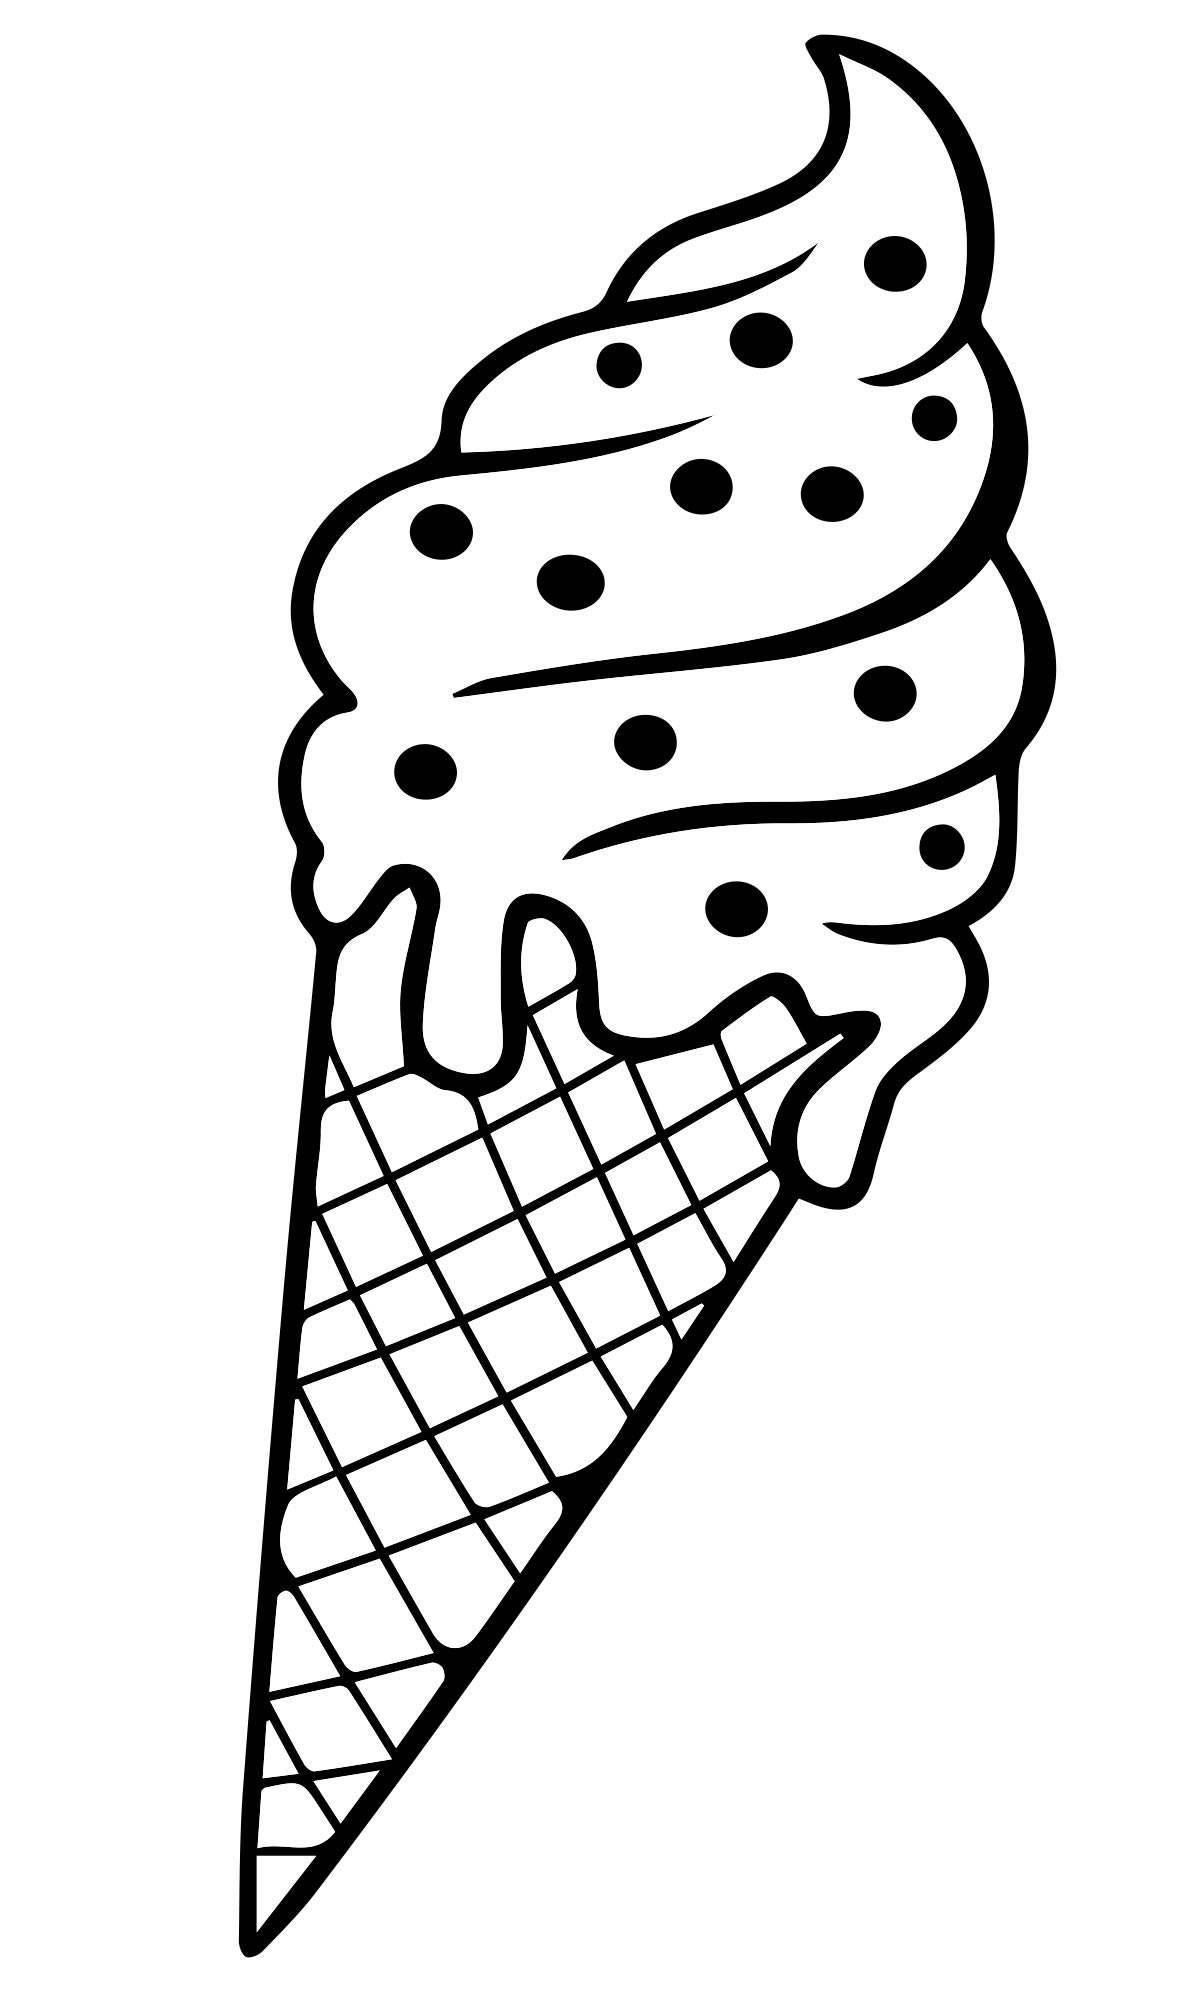 Coloring page of an attractive ice cream cone